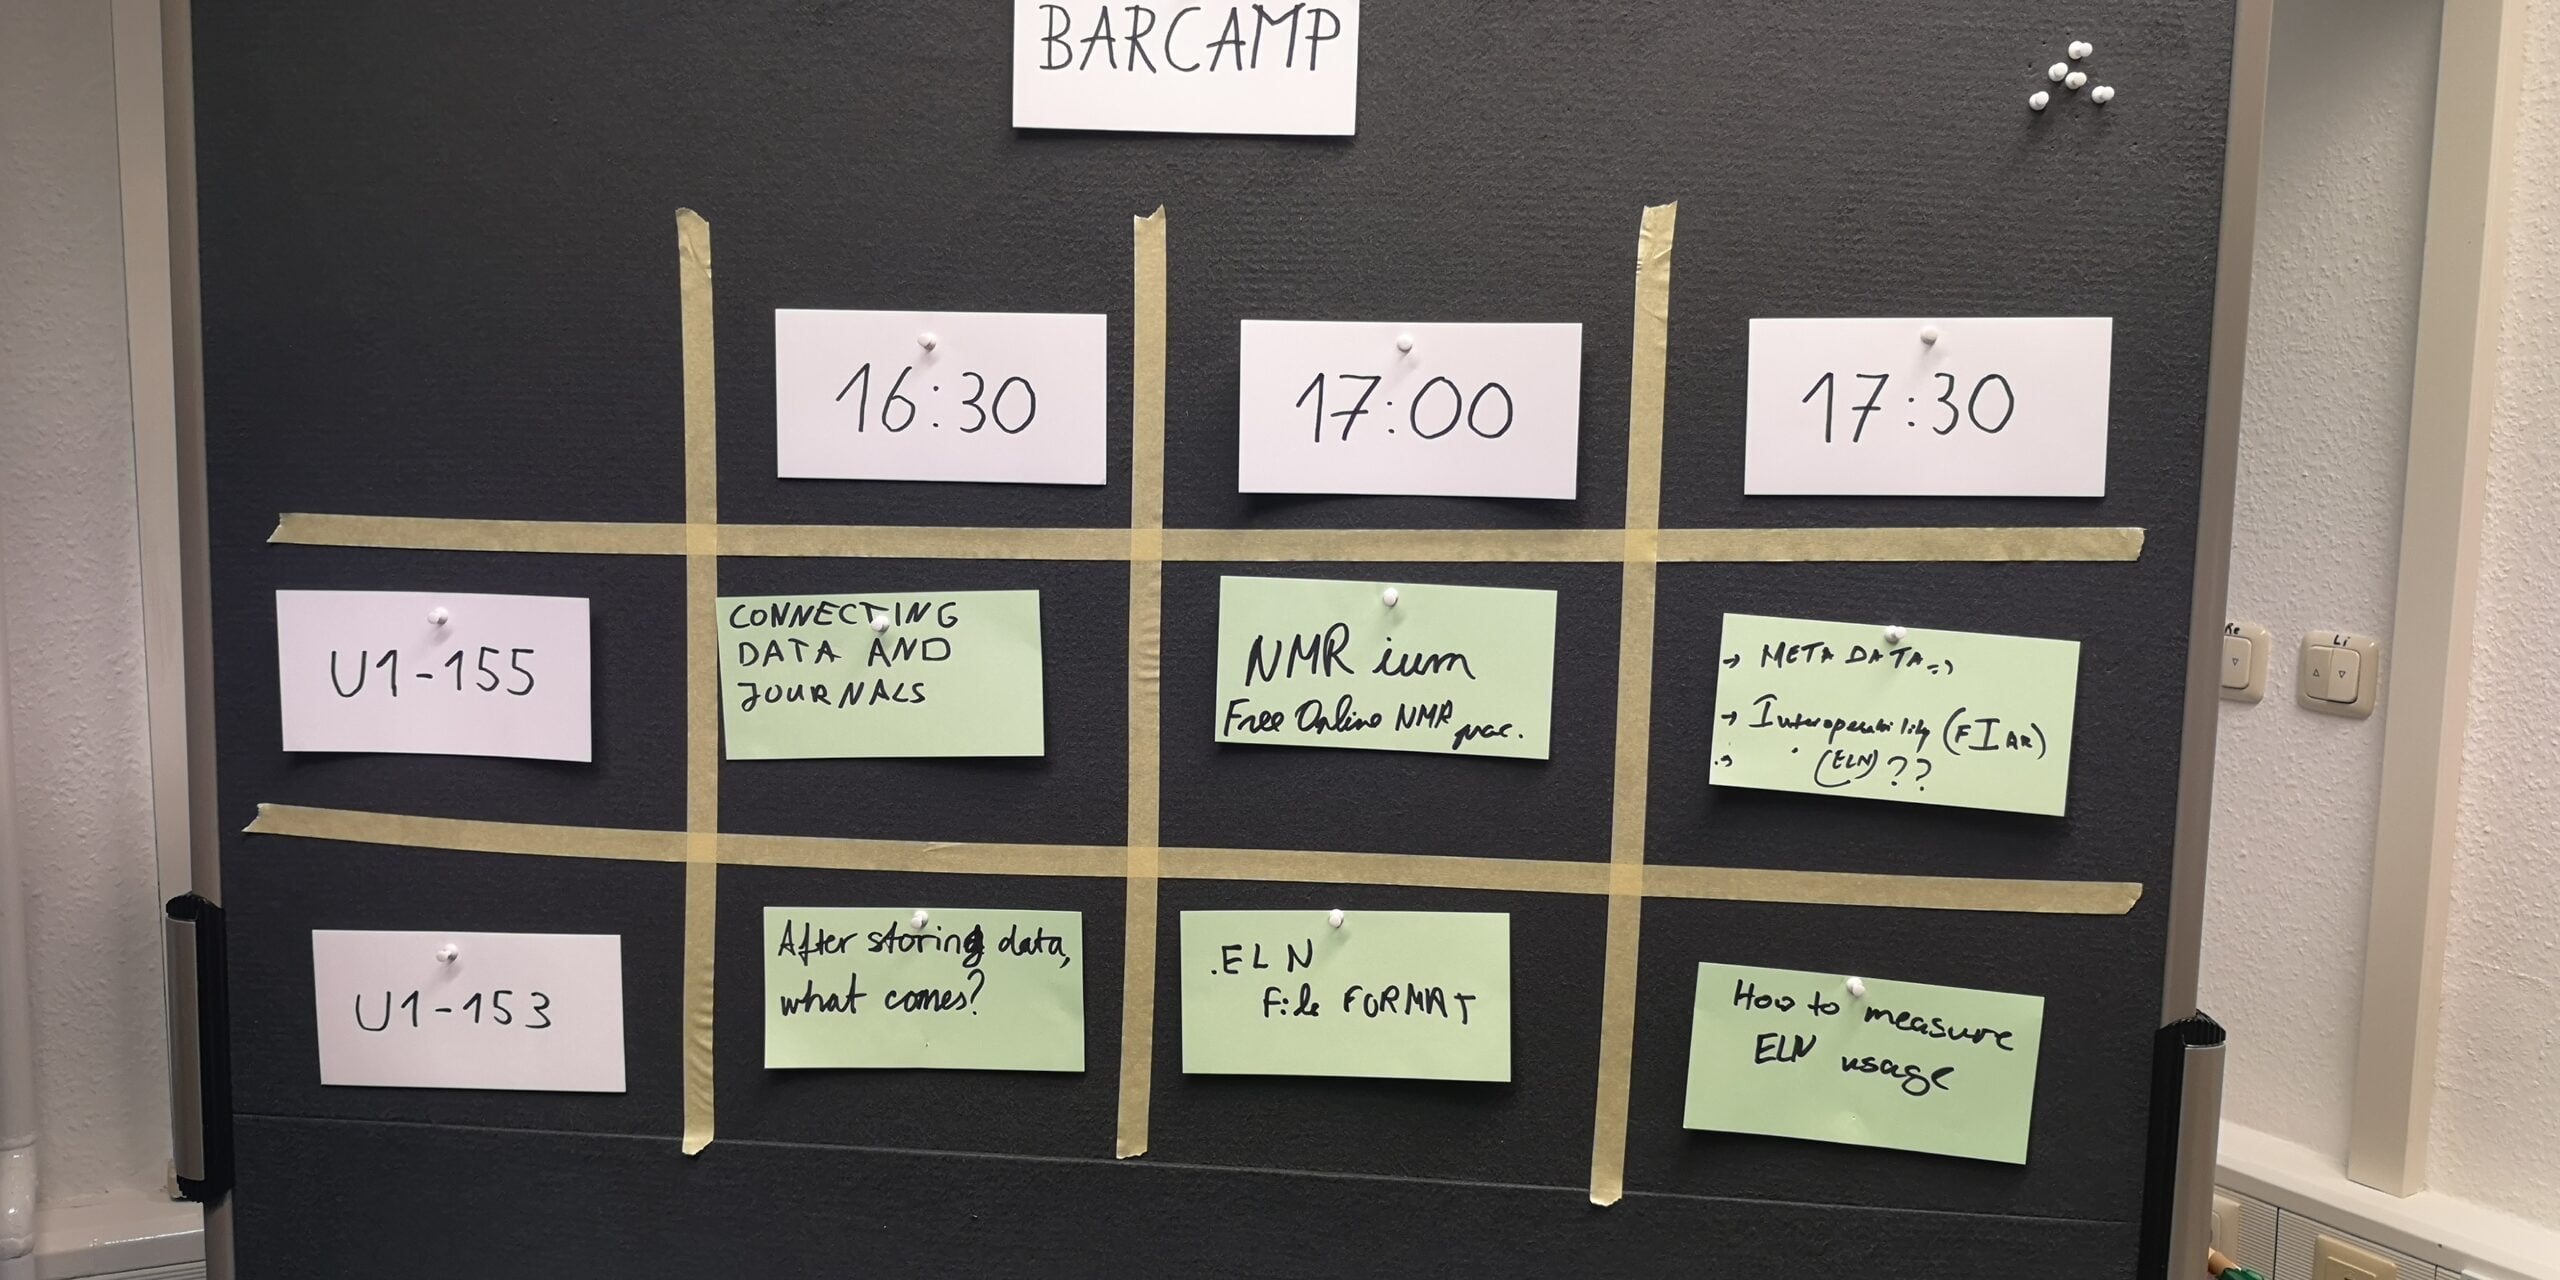 BarCamp-Schedule at the Chemistry Data Days 2023